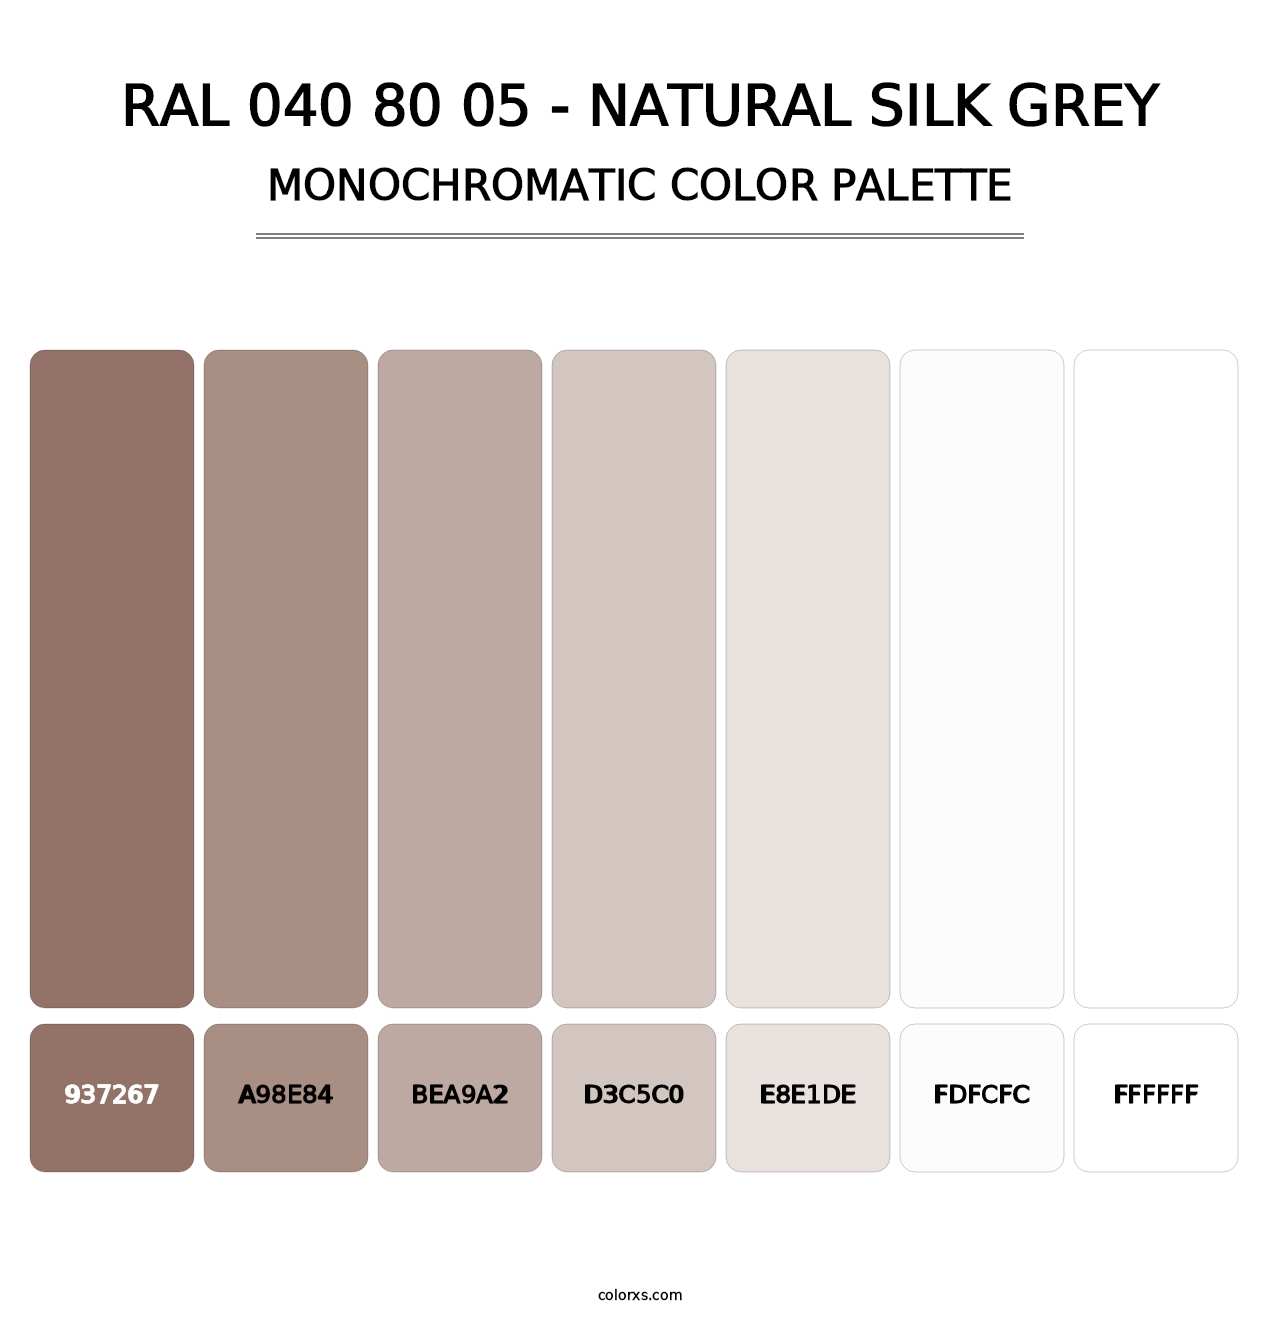 RAL 040 80 05 - Natural Silk Grey - Monochromatic Color Palette